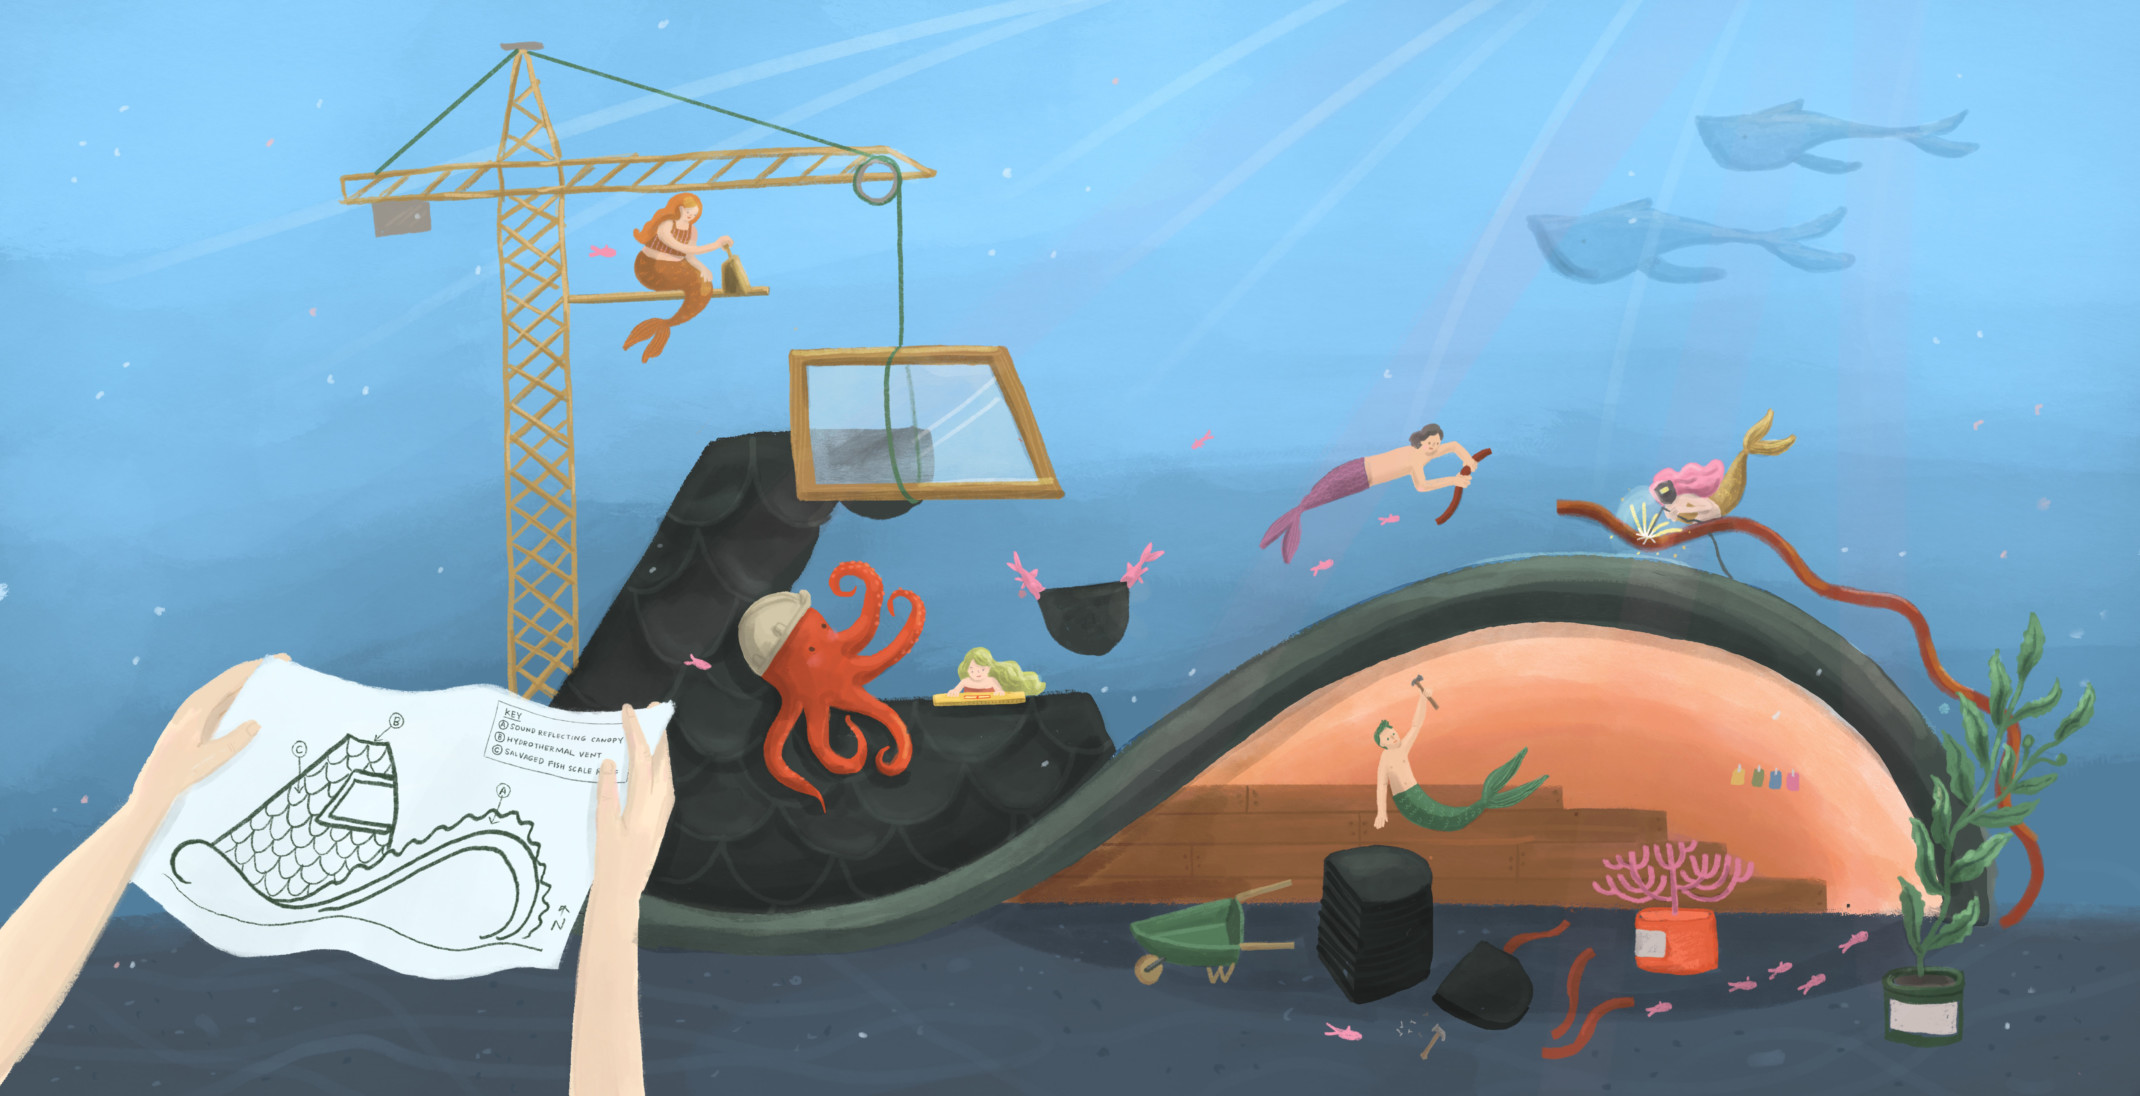 illustration by Mika Rane showing mermaids constructing an enclosed transparent curvaceous structure with a crane underwater.